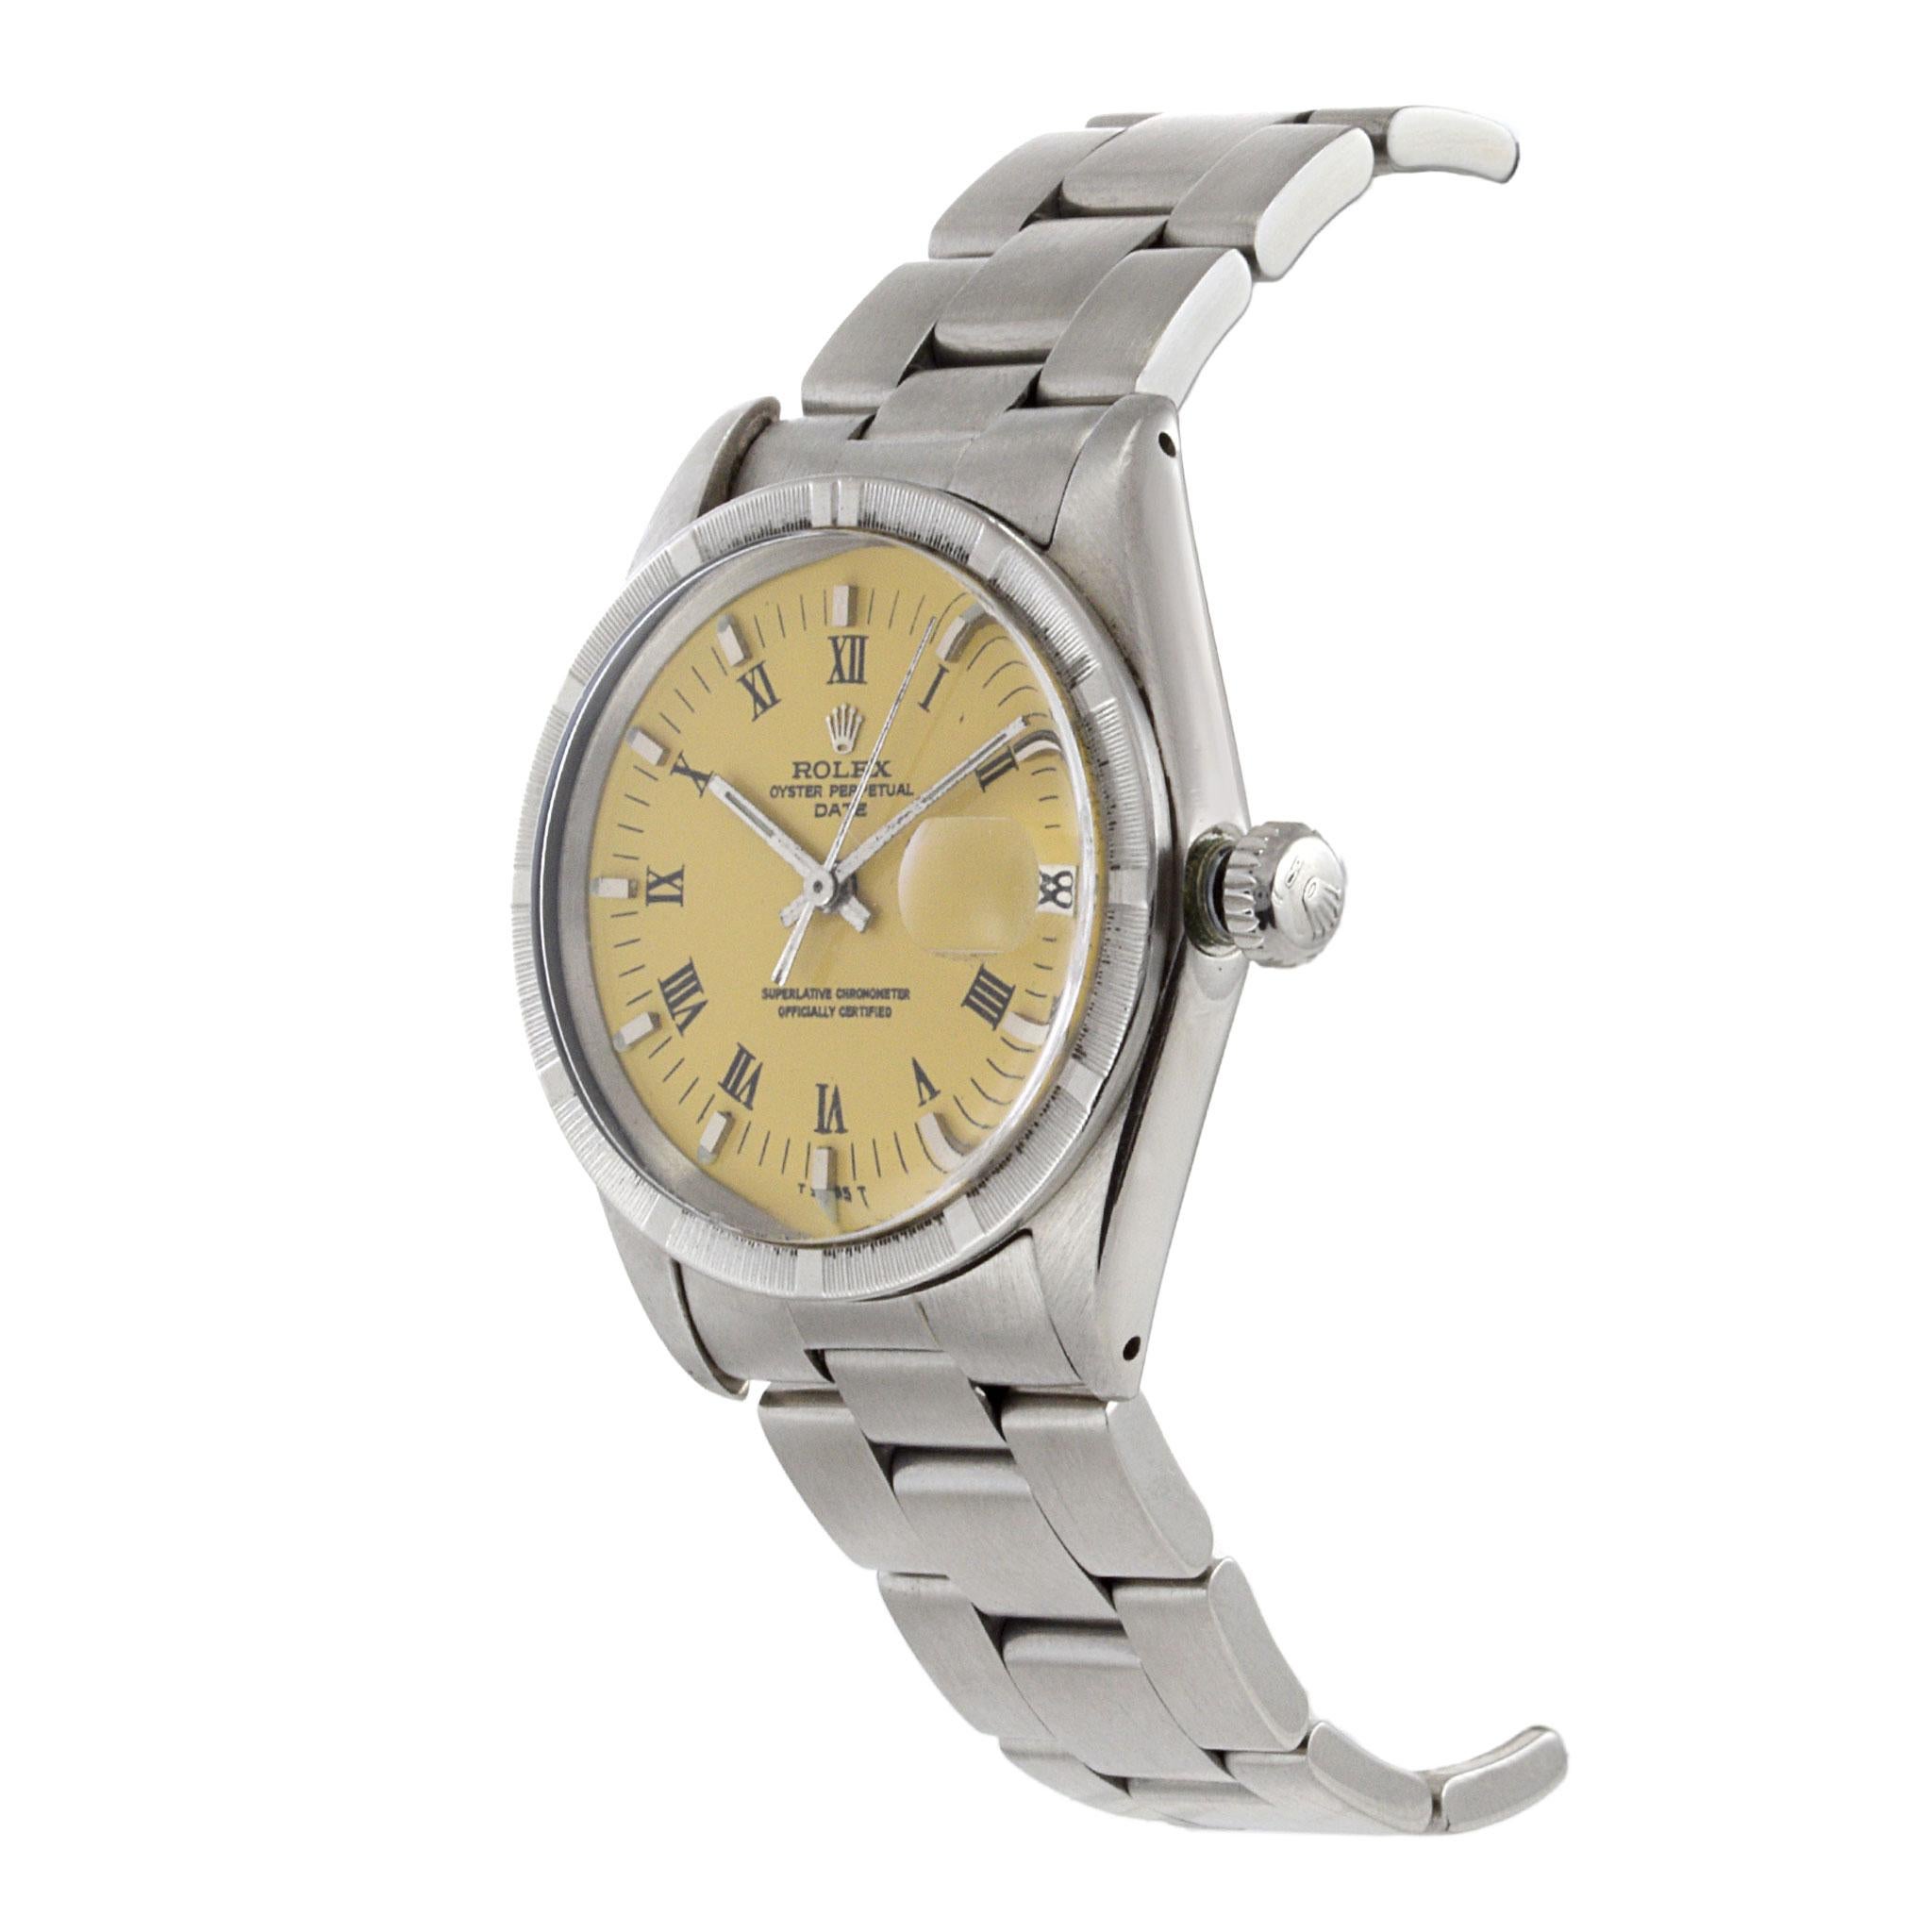 Rolex Oyster Perpetual Date Referenz 1500 im Zustand „Gut“ im Angebot in New York, NY